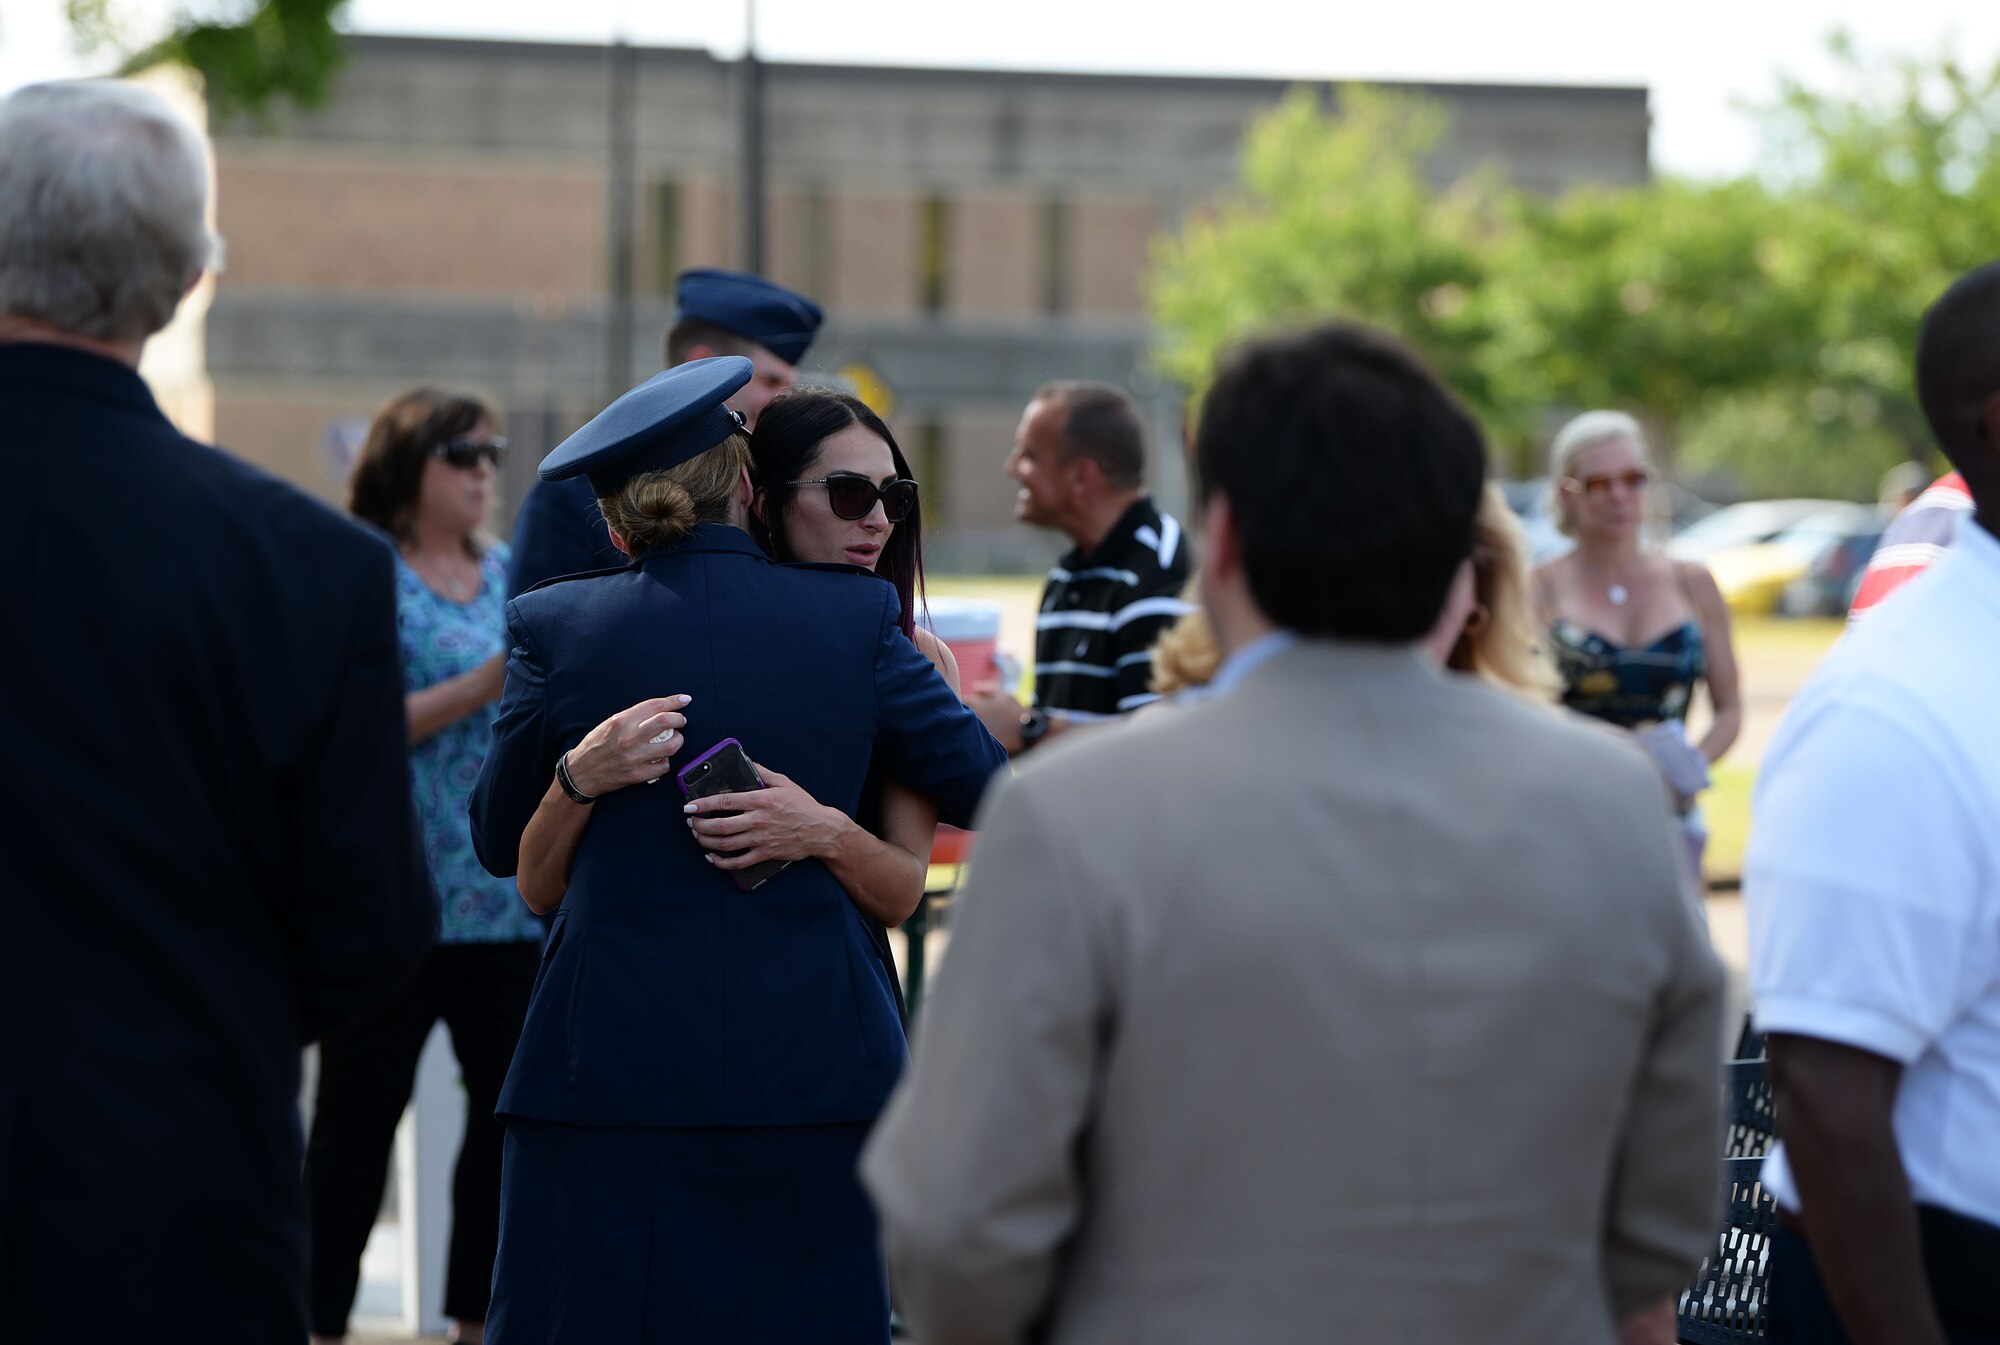 Col. Samantha Weeks, 14 Flying Training Wing commander, hugs Nicoleta Padureanu, widow of 1st Lt. David Albandoz, 198th Airlift Squadron C-130 Hercules pilot, Puerto Rico during a Memorial Day Ceremony May 28, 2019, at the Richard “Gene” Smith Plaza on Columbus Air Force Base, Miss. Nicoleta and her daughter, Aeliana, visited Columbus AFB to attend a Memorial Day Ceremony in his honor where his name was unveiled on the memorial wall in the Richard “Gene” Smith Plaza. (U.S. Air Force photo by Airman 1st Class Hannah Bean)